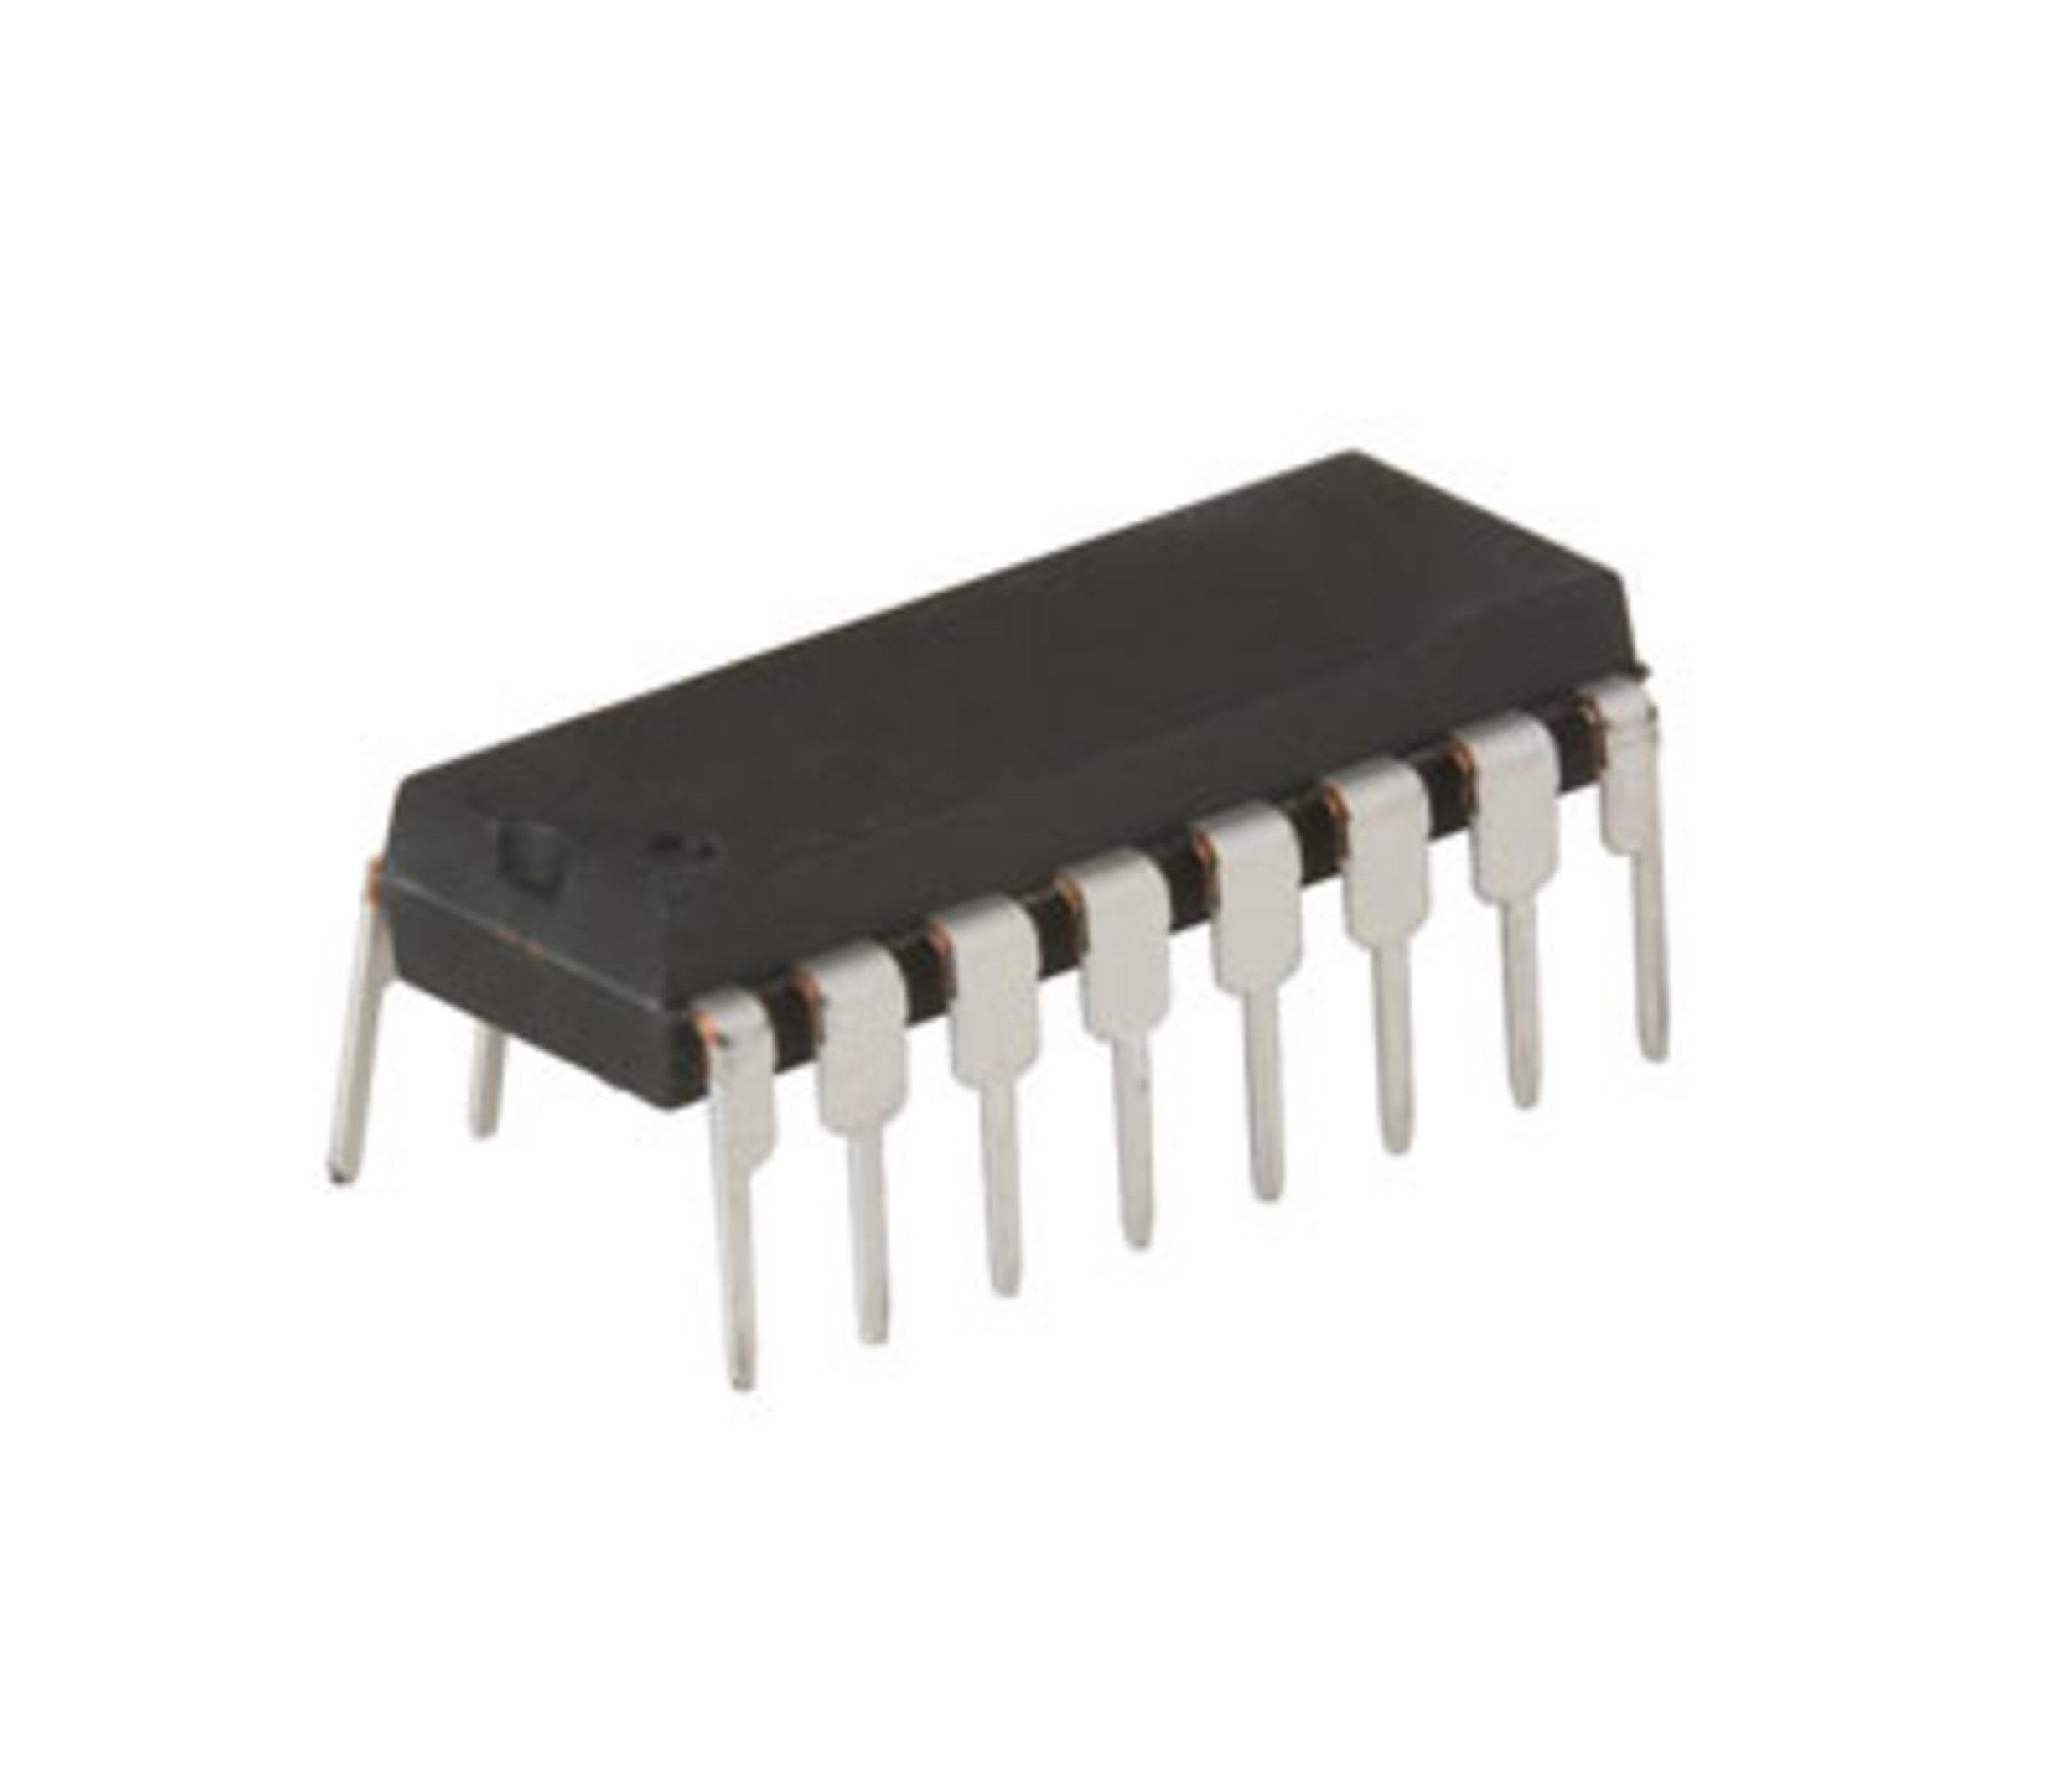 PCF8591 DIP-16 NXP/PHI 8-Bit A/D and D/A Converter IC